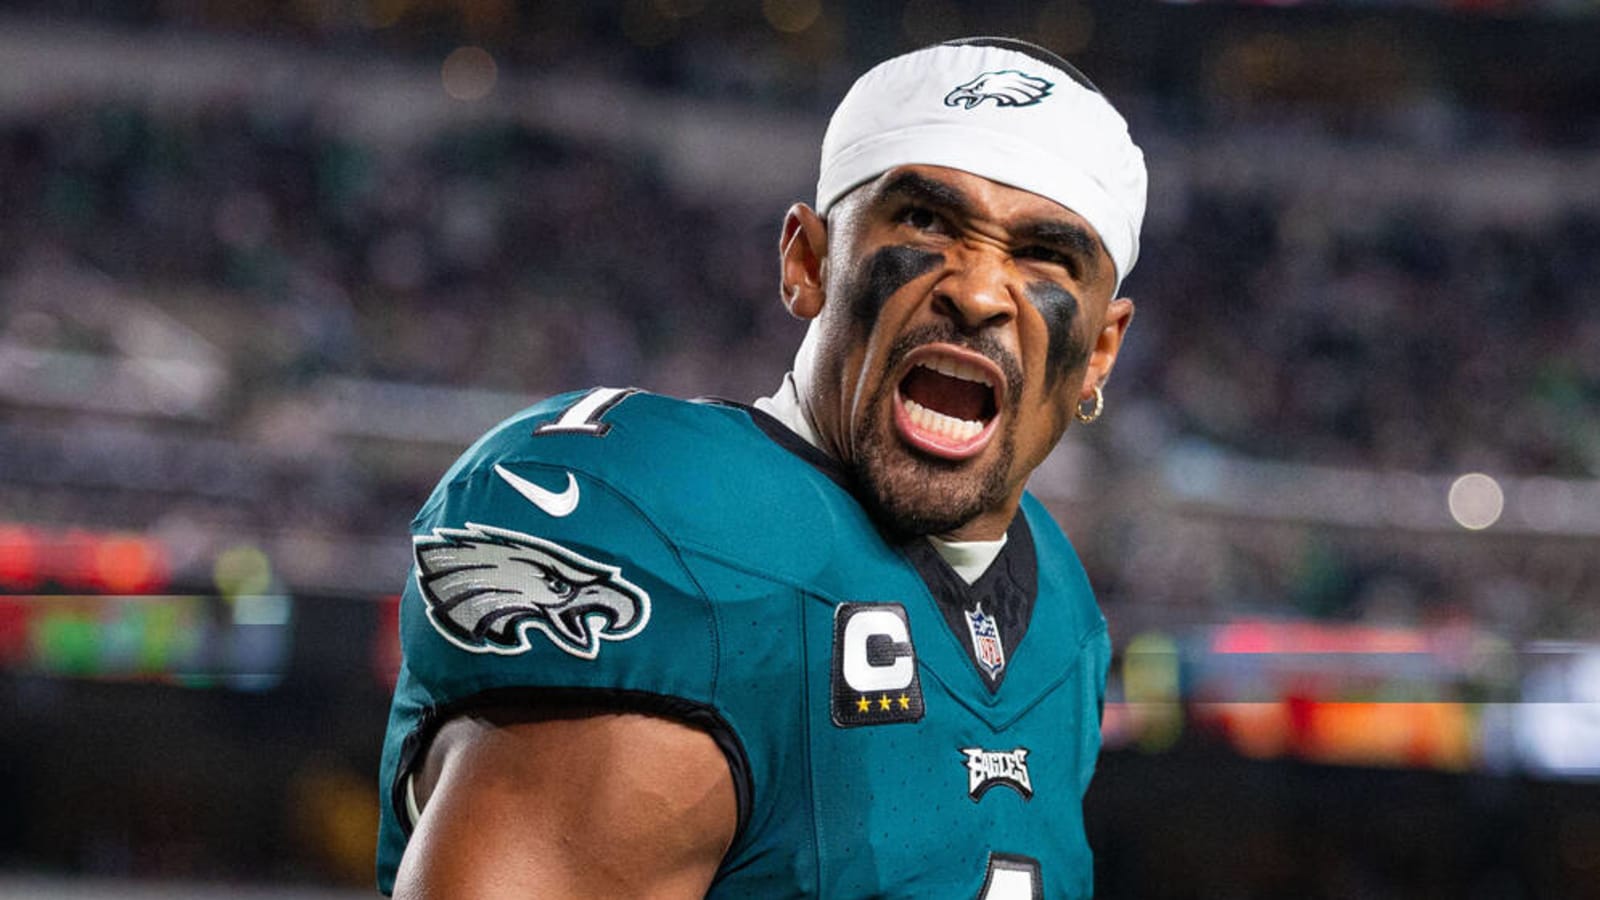 Watch: Former Eagles Super Bowl champ thinks team is 'well-oiled machine'